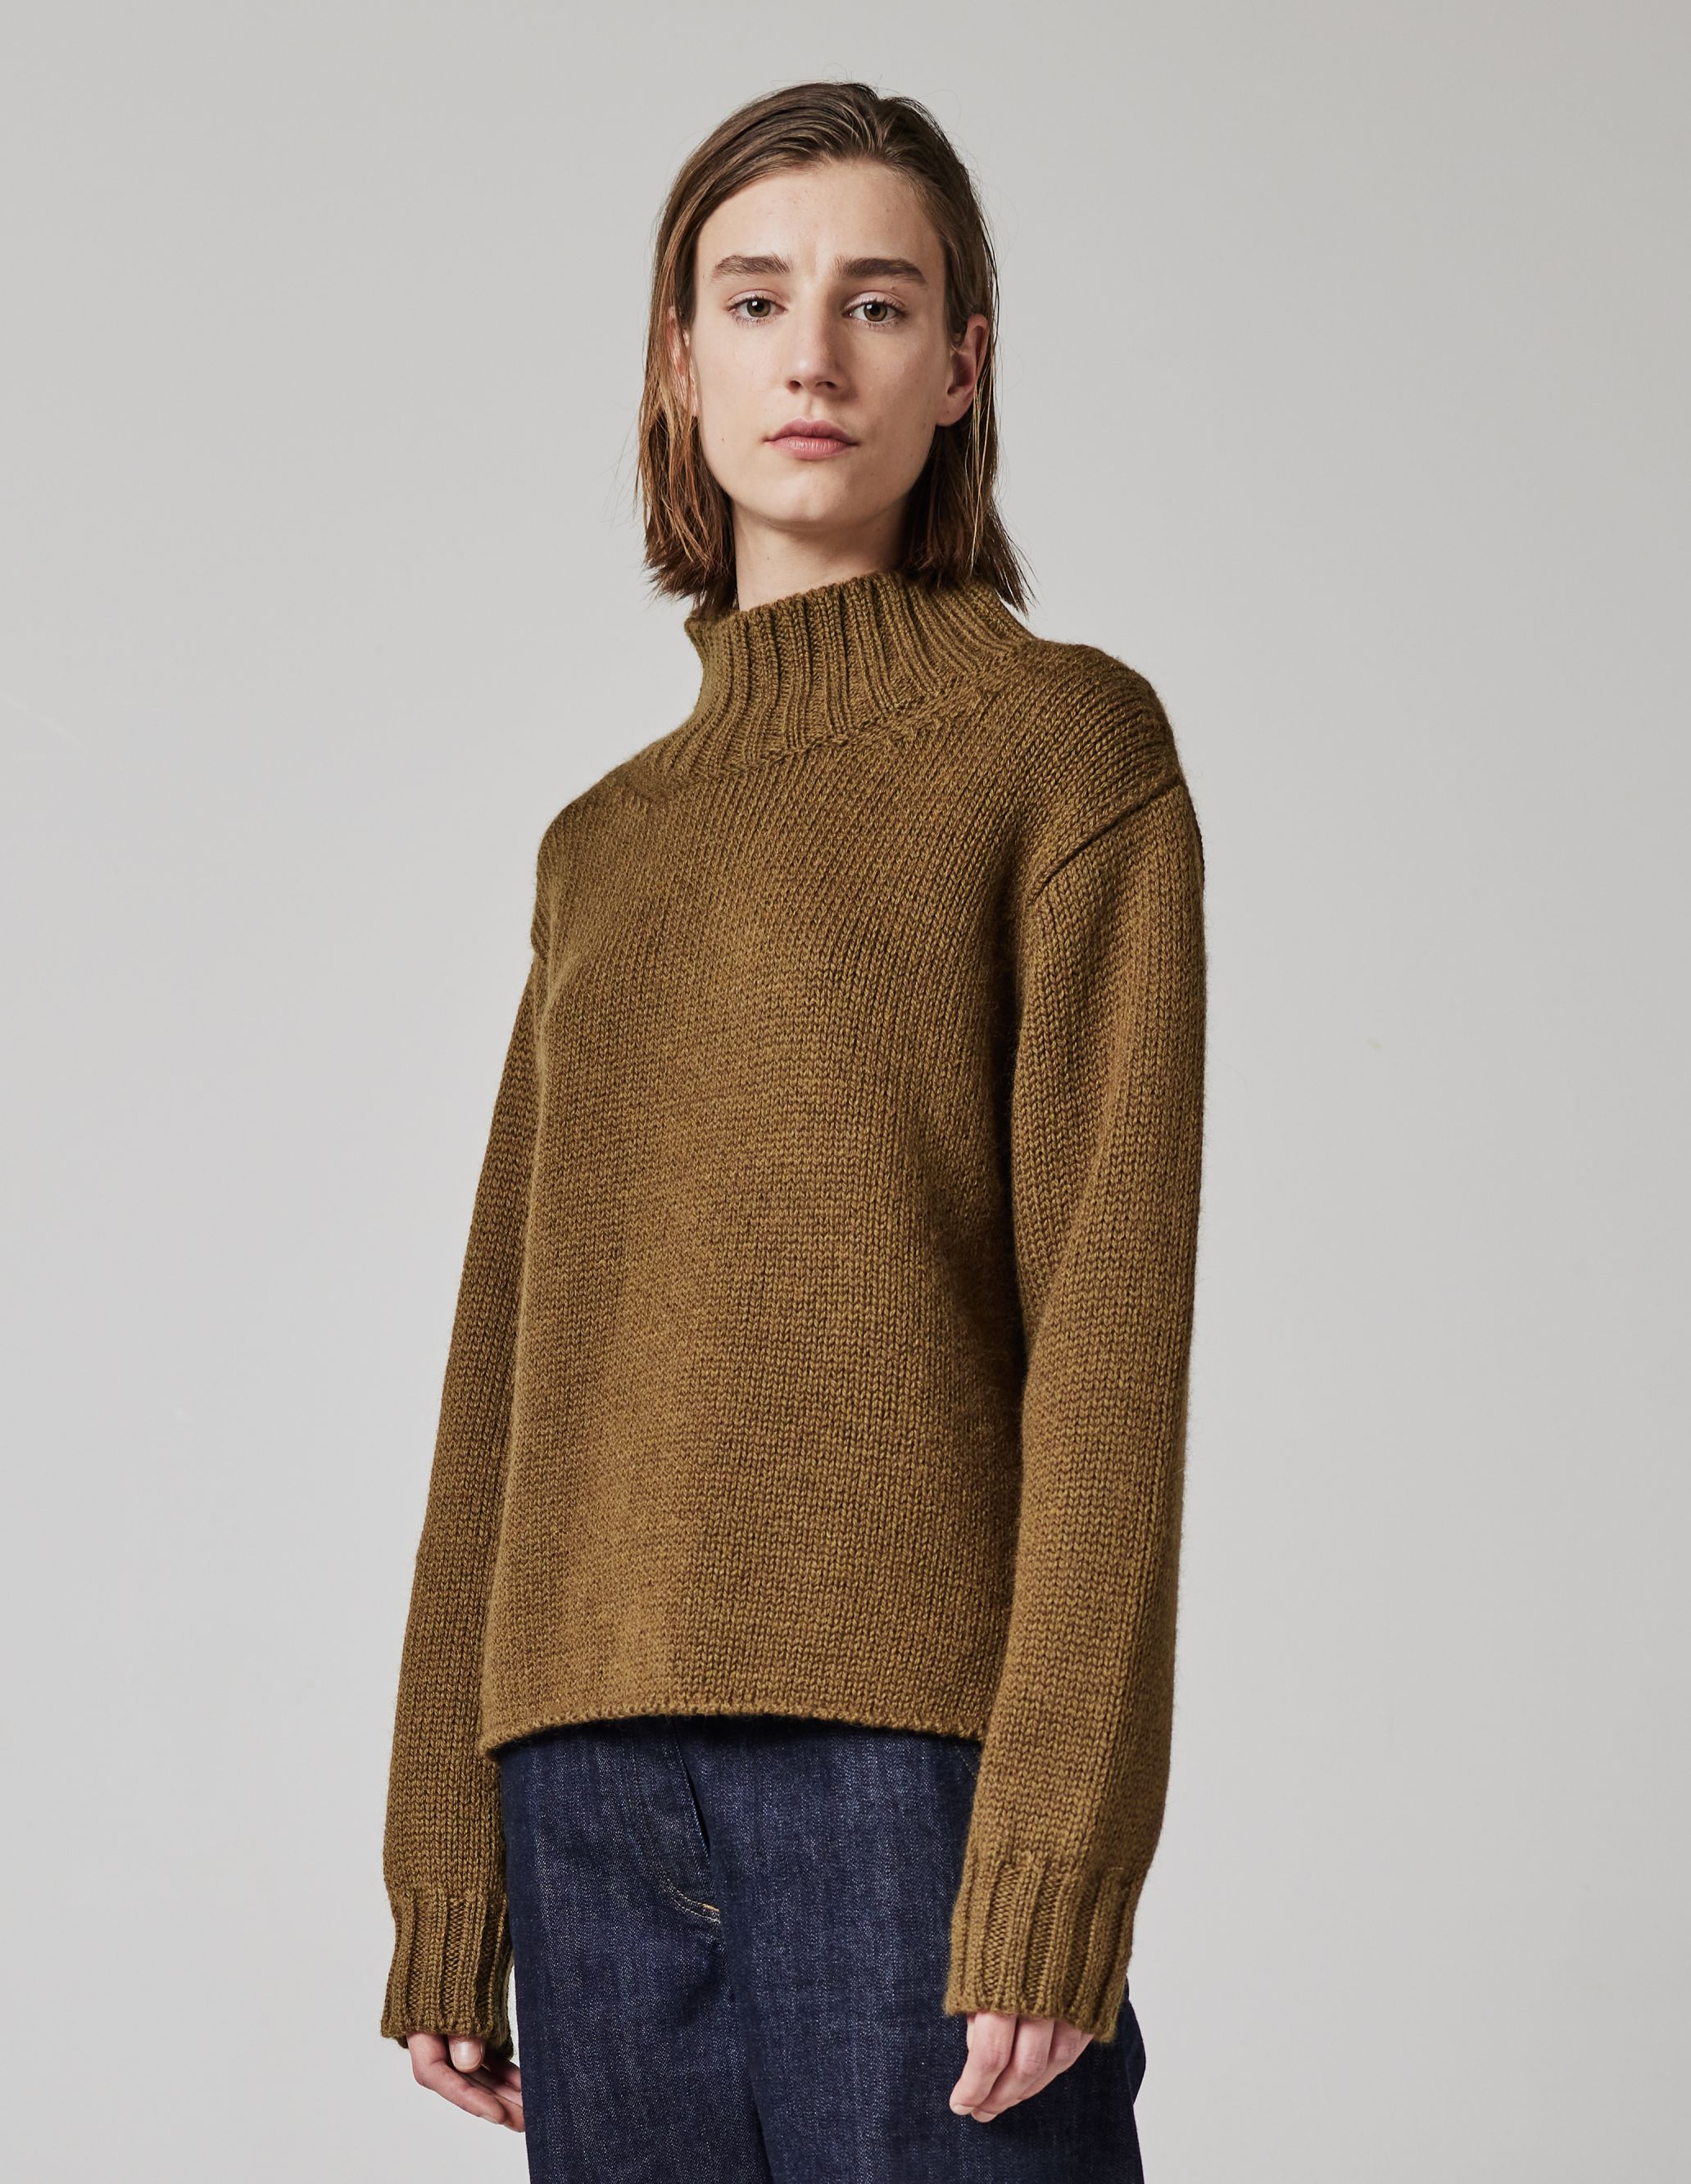 MARGARET HOWELL - Thicket British wool sweater | MHL. by Margaret